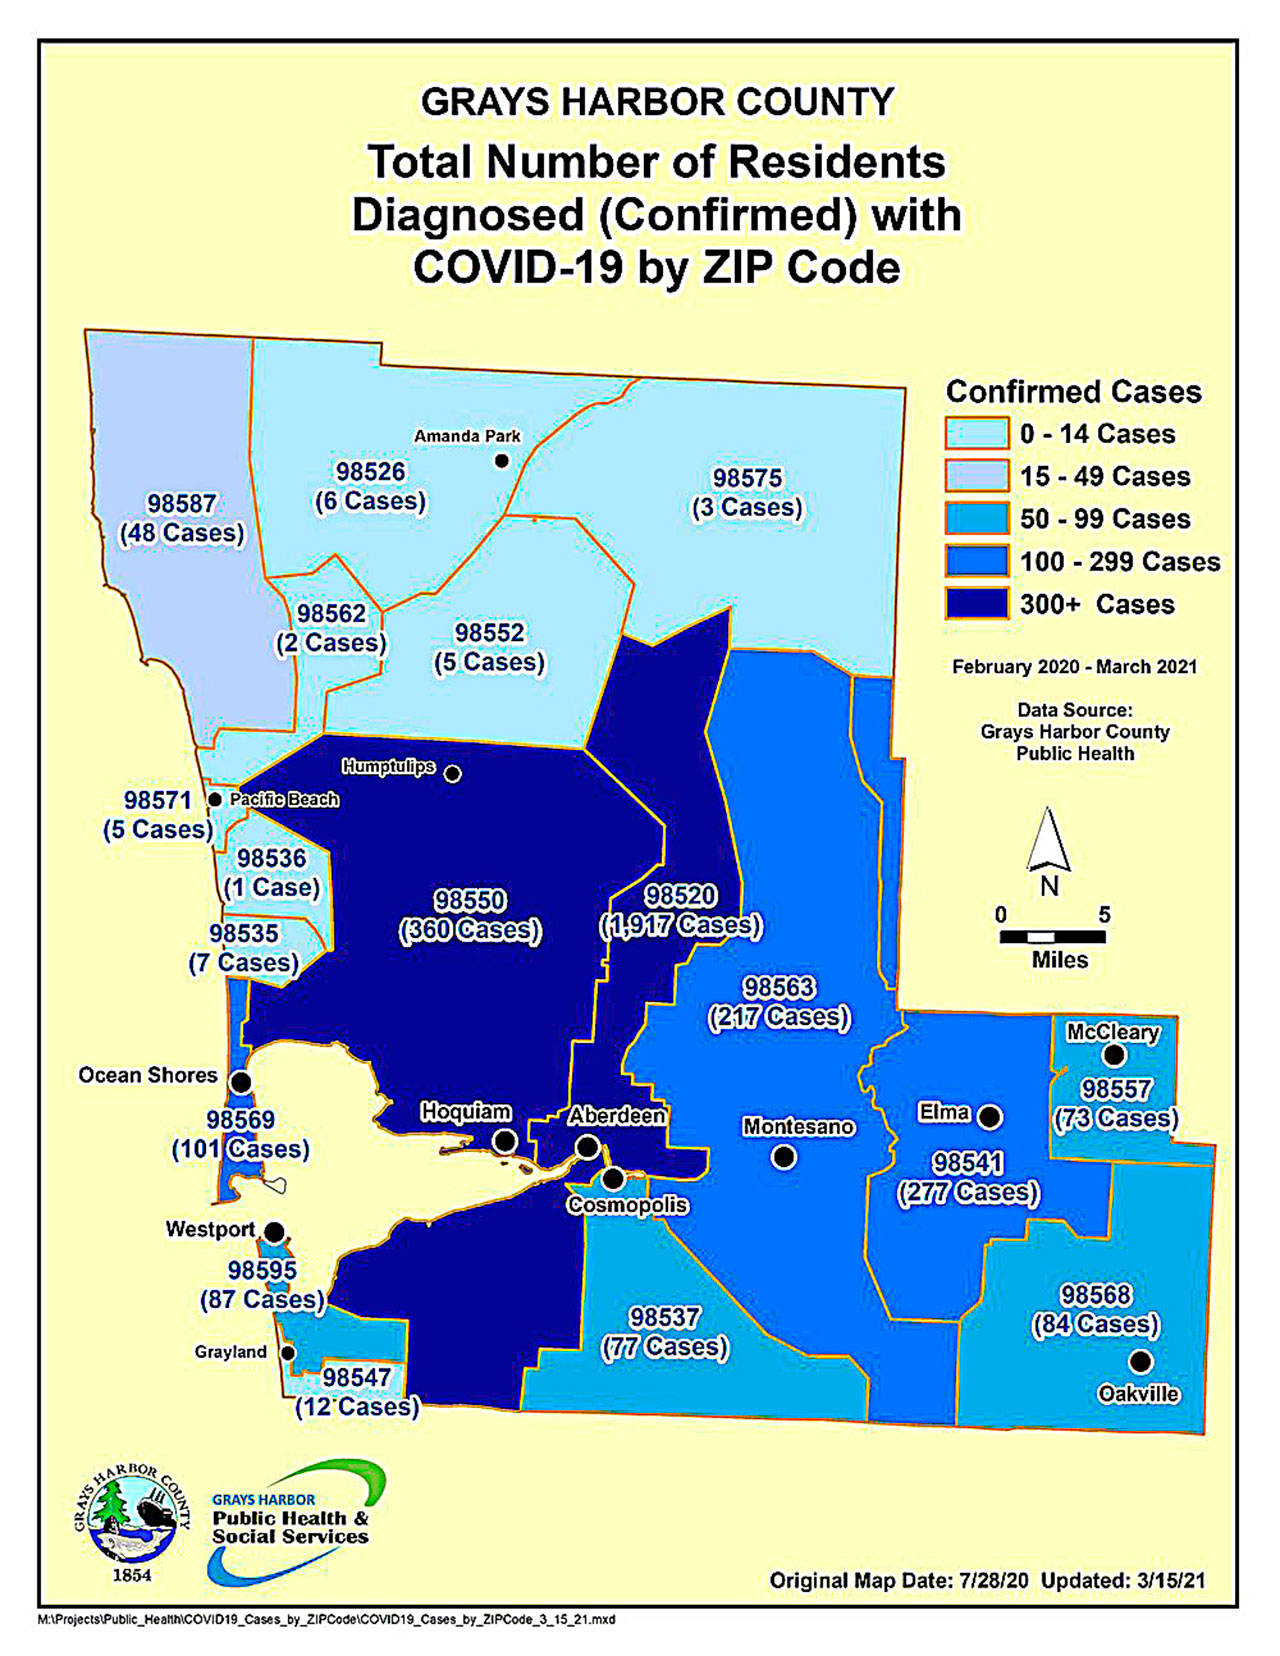 COVID cases by zip code, updated March 15.